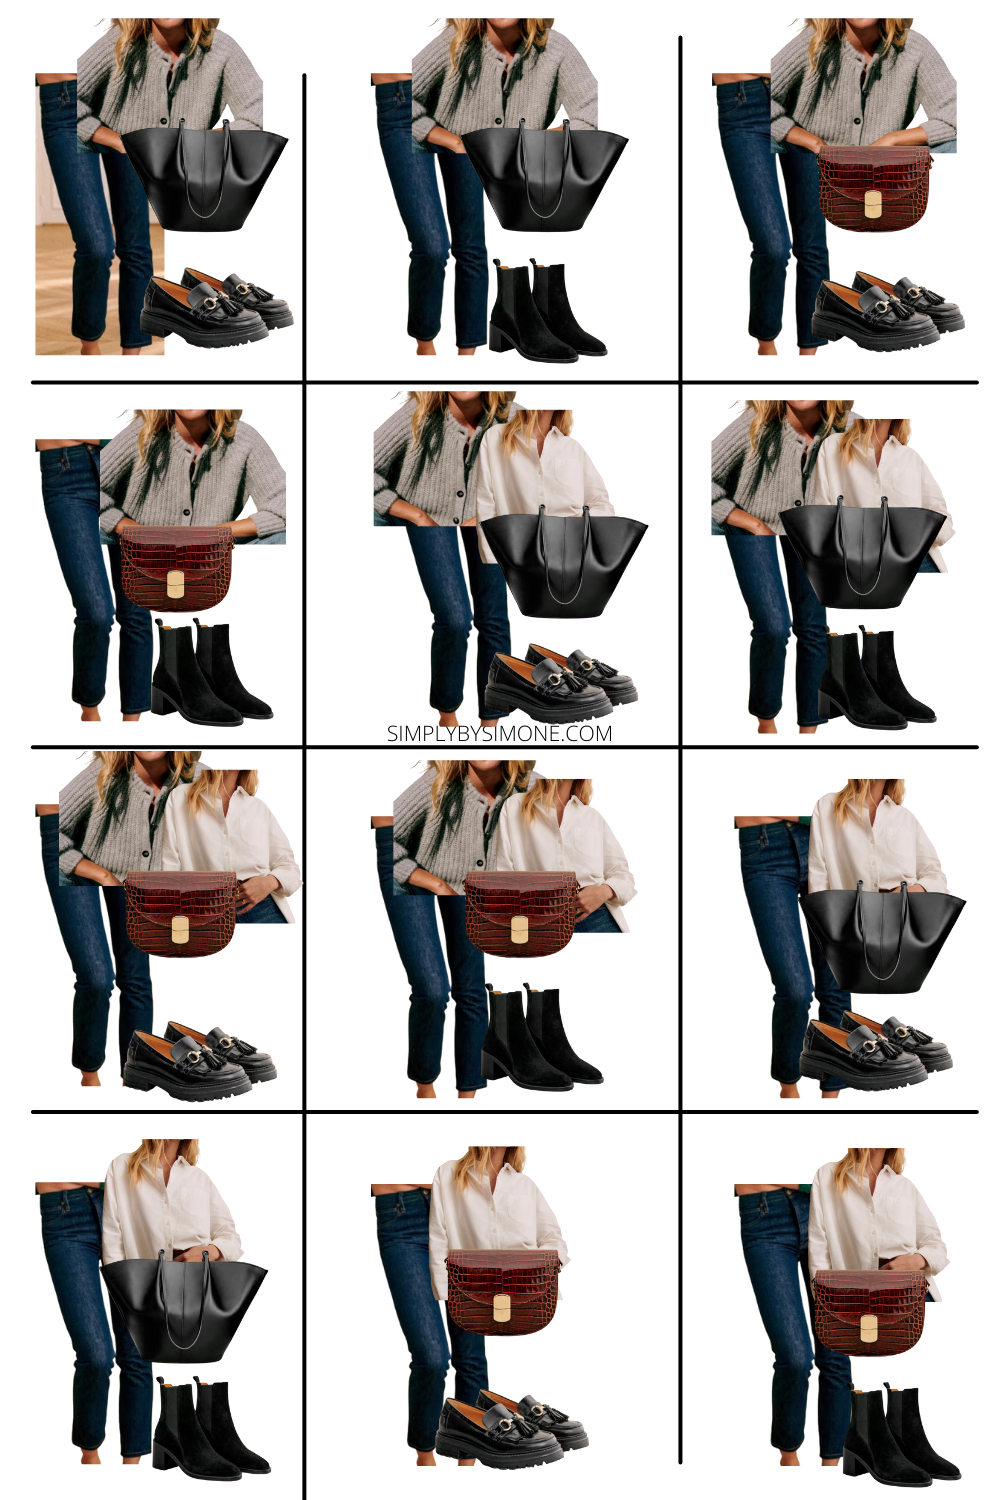 Affordable Sezane Fall Capsule Wardrobe | 12 Pieces, 48 Outfits | How to Build a Capsule Wardrobe | Sezane Fall Clothes | Outfit Inspiration | 48 Fall Weather Outfit Ideas | Fall Vacation Packing Guide | Sezane Fall Capsule Wardrobe - What To Wear This Fall 2023, Parisian Outfit Ideas | Looks 1-12 | Simply by Simone